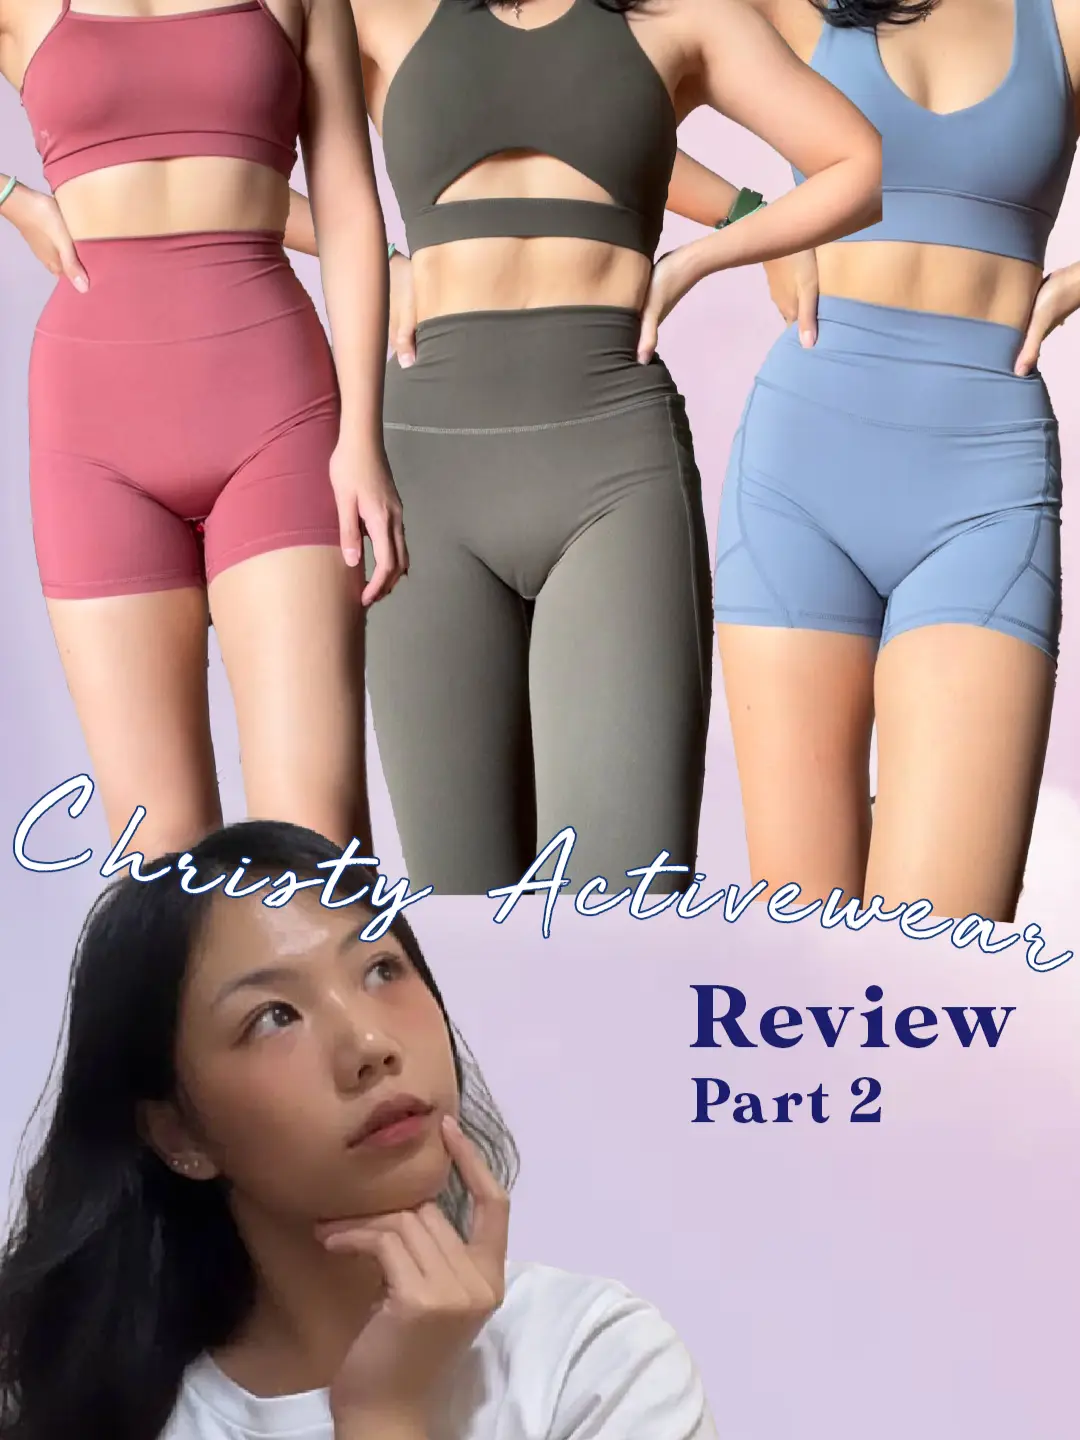 REVIEW: KYDRA'S ACTIVEWEAR, Video published by jolynnn